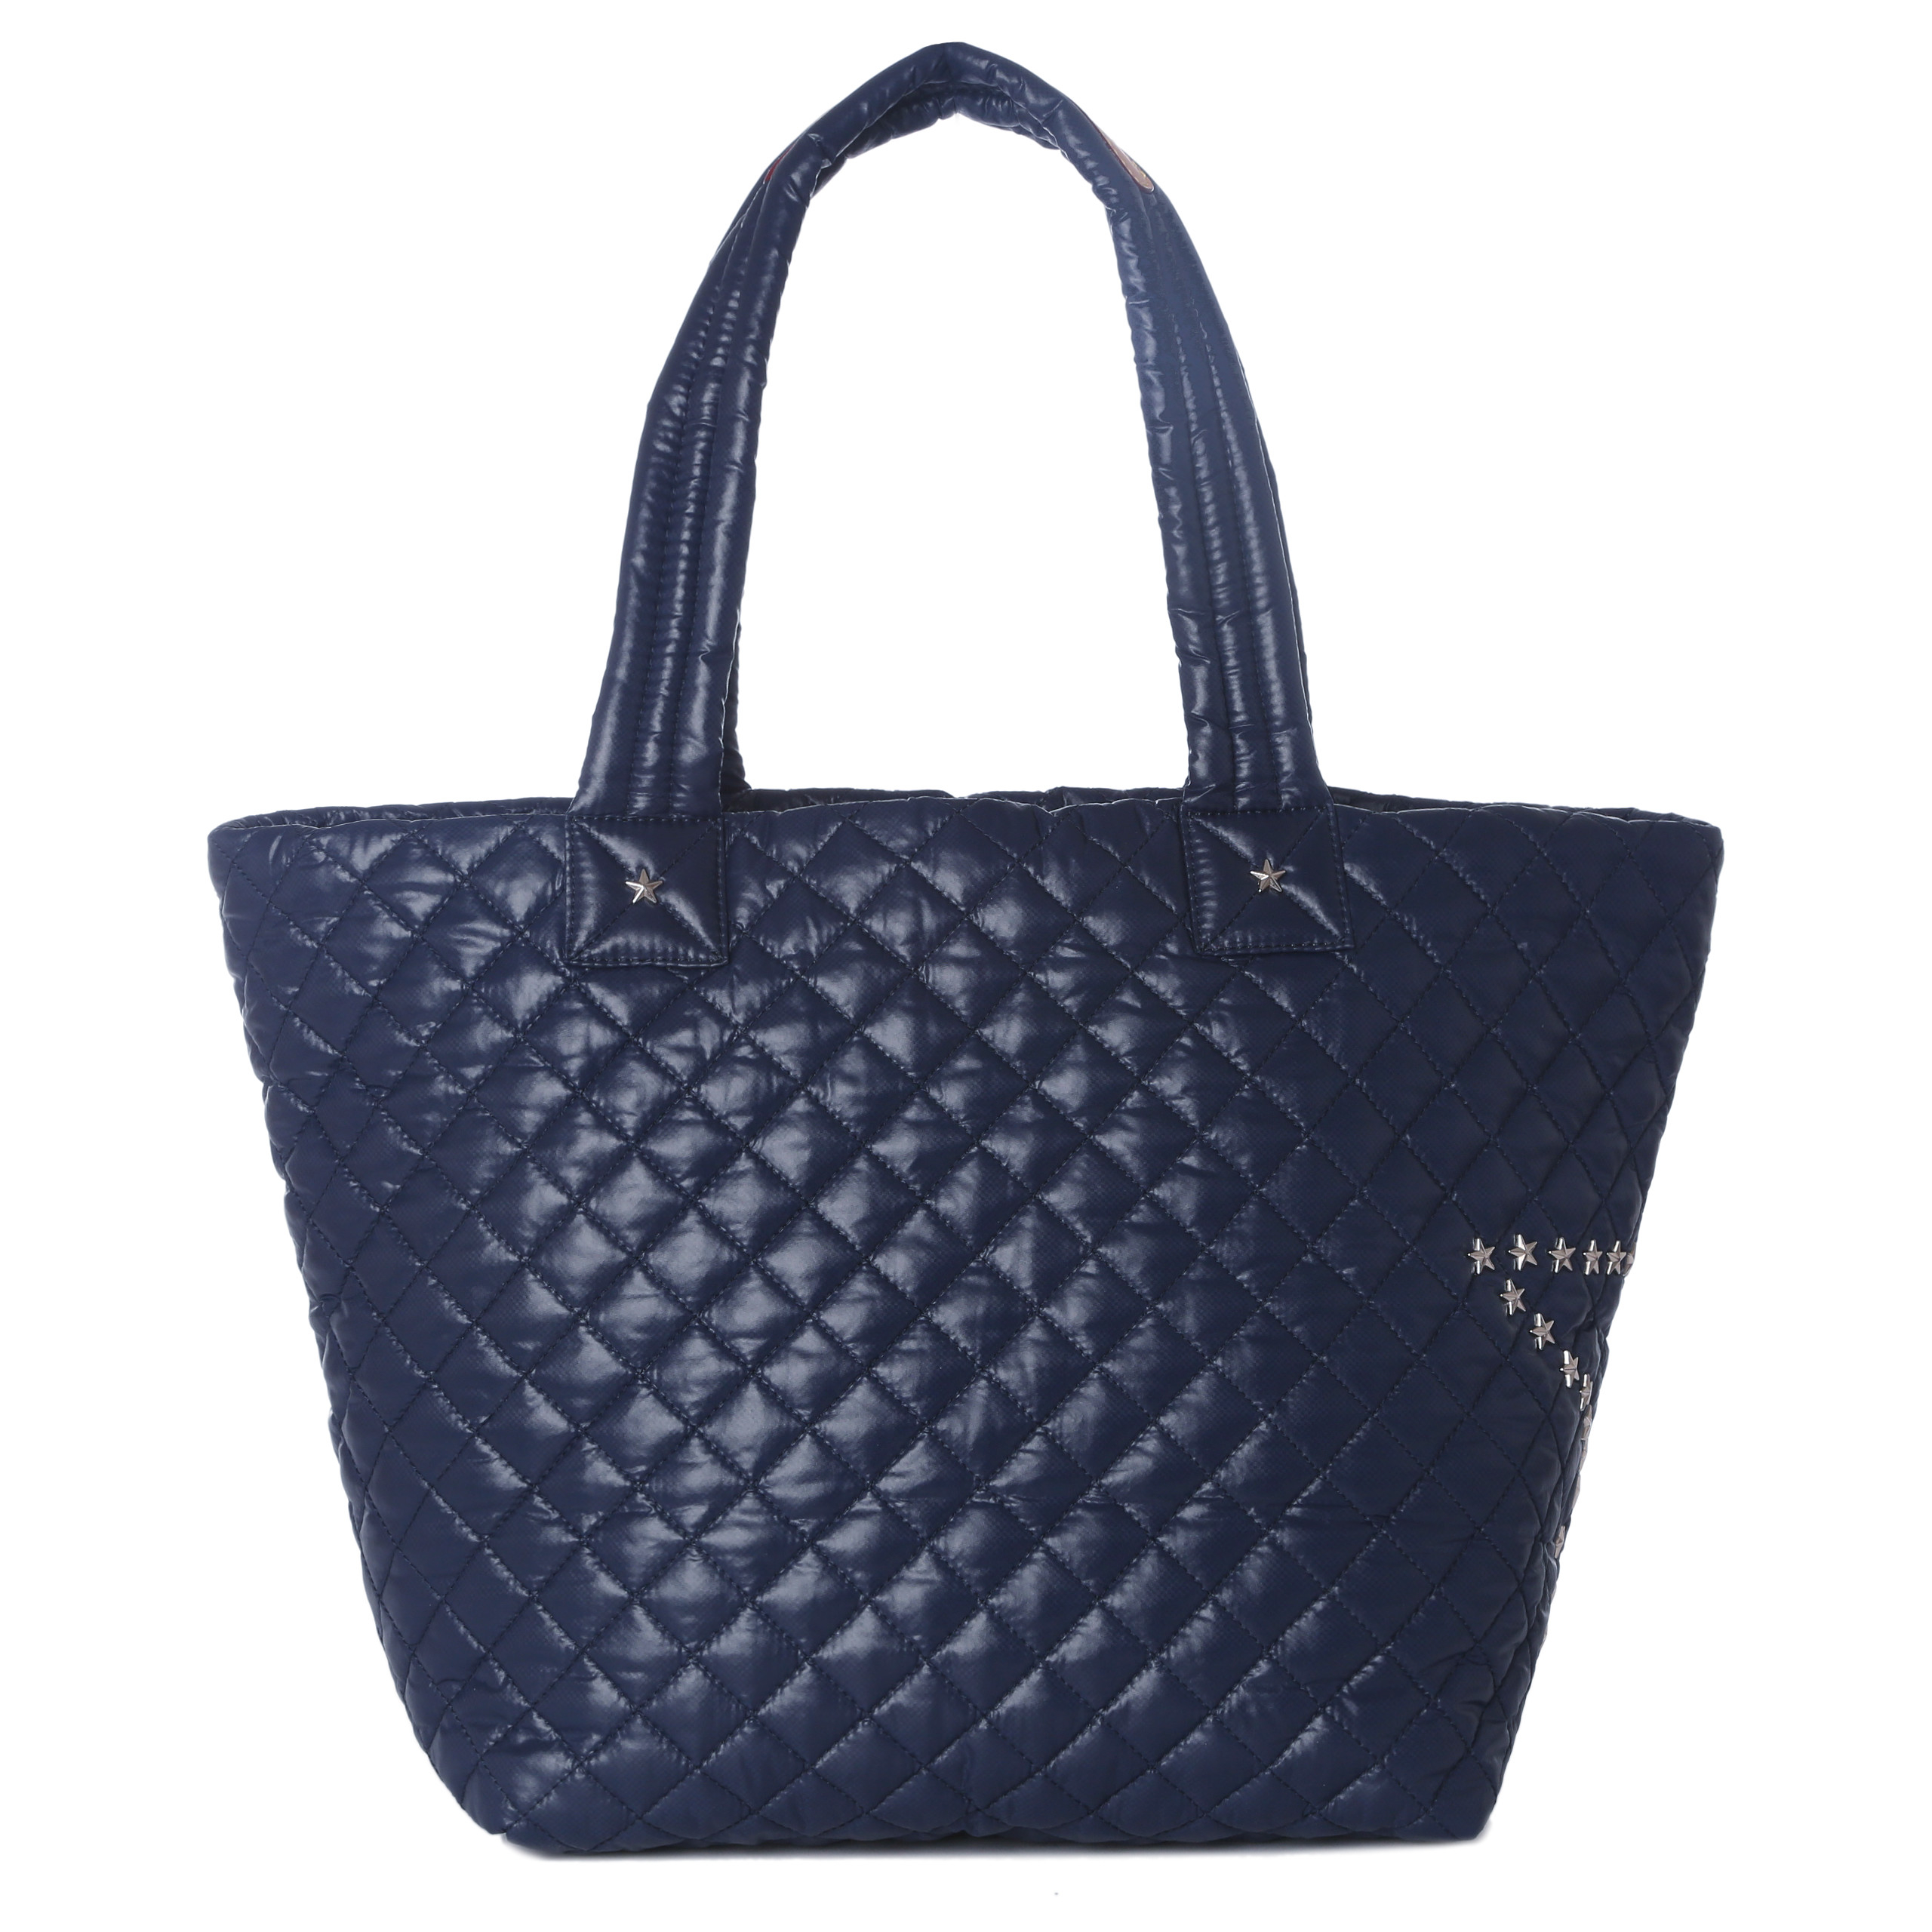 MZ Wallace Medium Metro Tote Navy Star Studded in Blue - Lyst